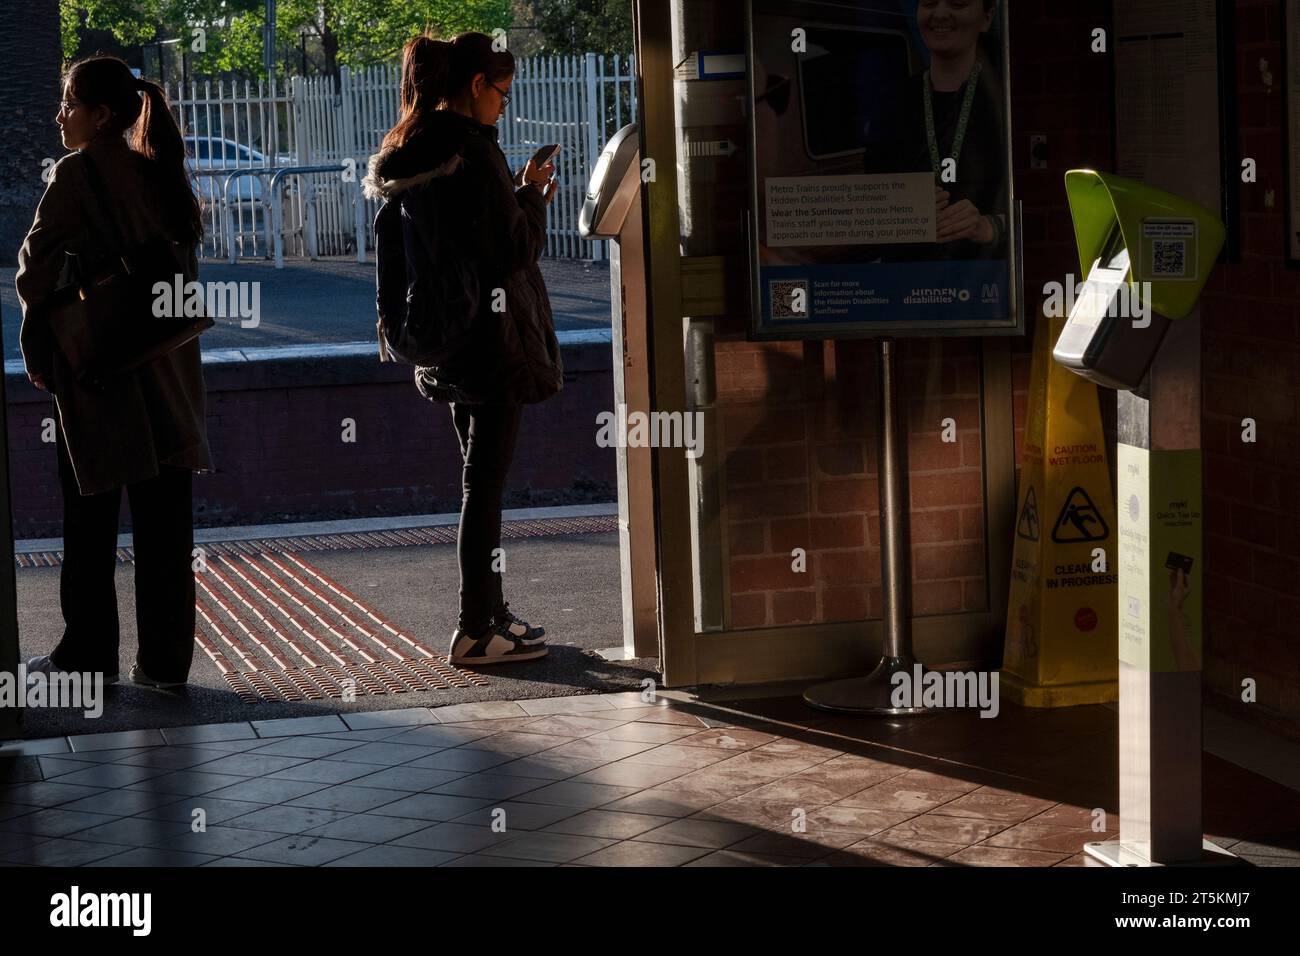 Passengers check their tickets on a mobile phone at a vendor machine on the platform of a suburban railway station. Clifton Hill, Victoria, Australia Stock Photo